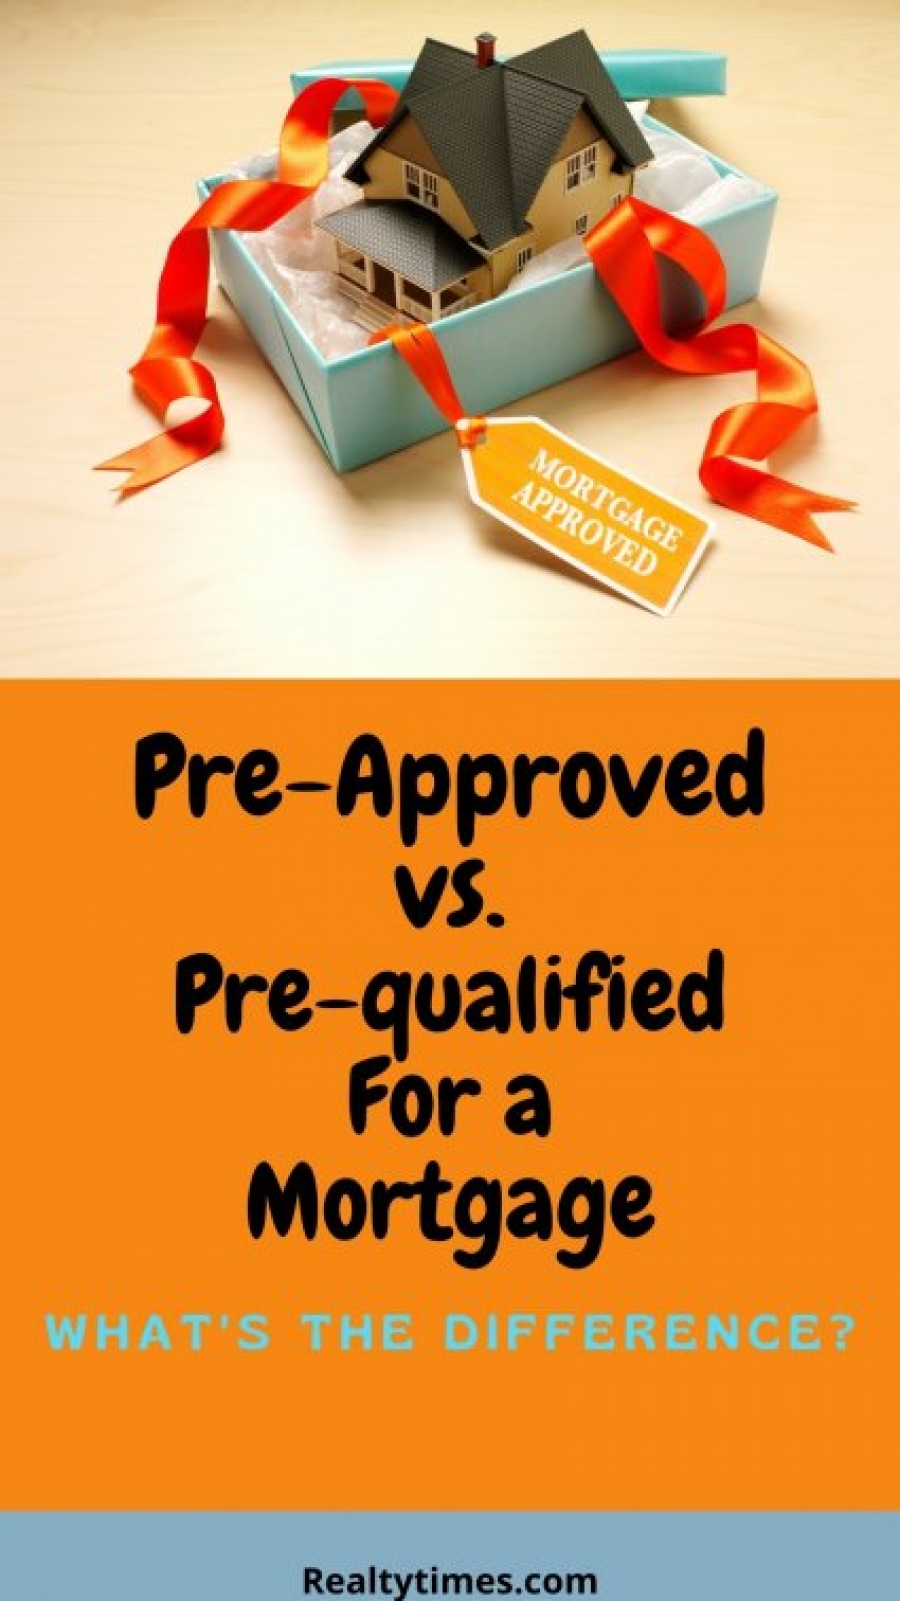 Preapproved vs Prequalified For a Mortgage